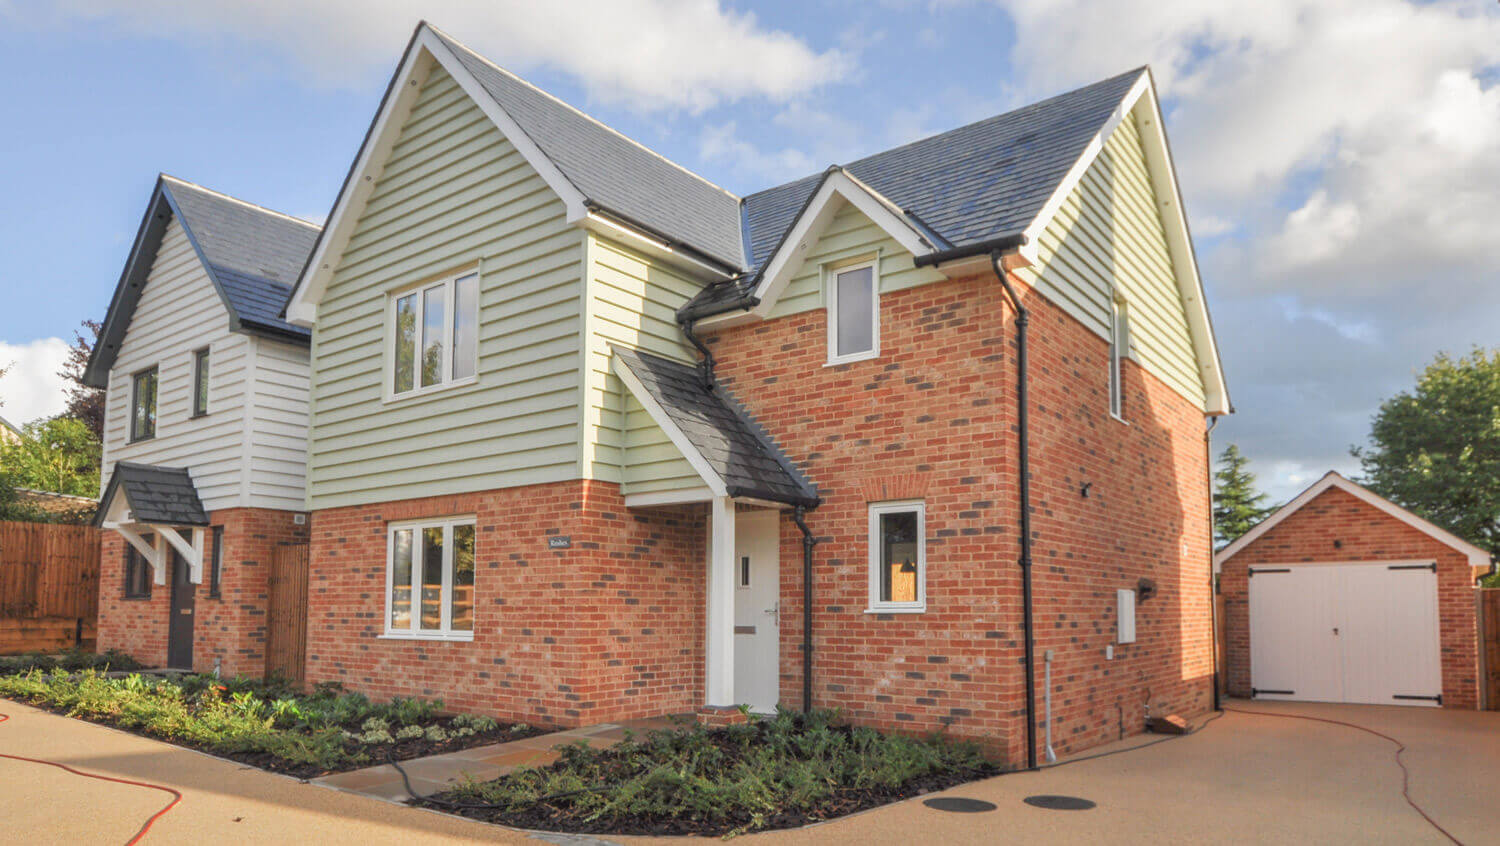 The front view of Rushes, a three-bed house in our Calvert Close development.